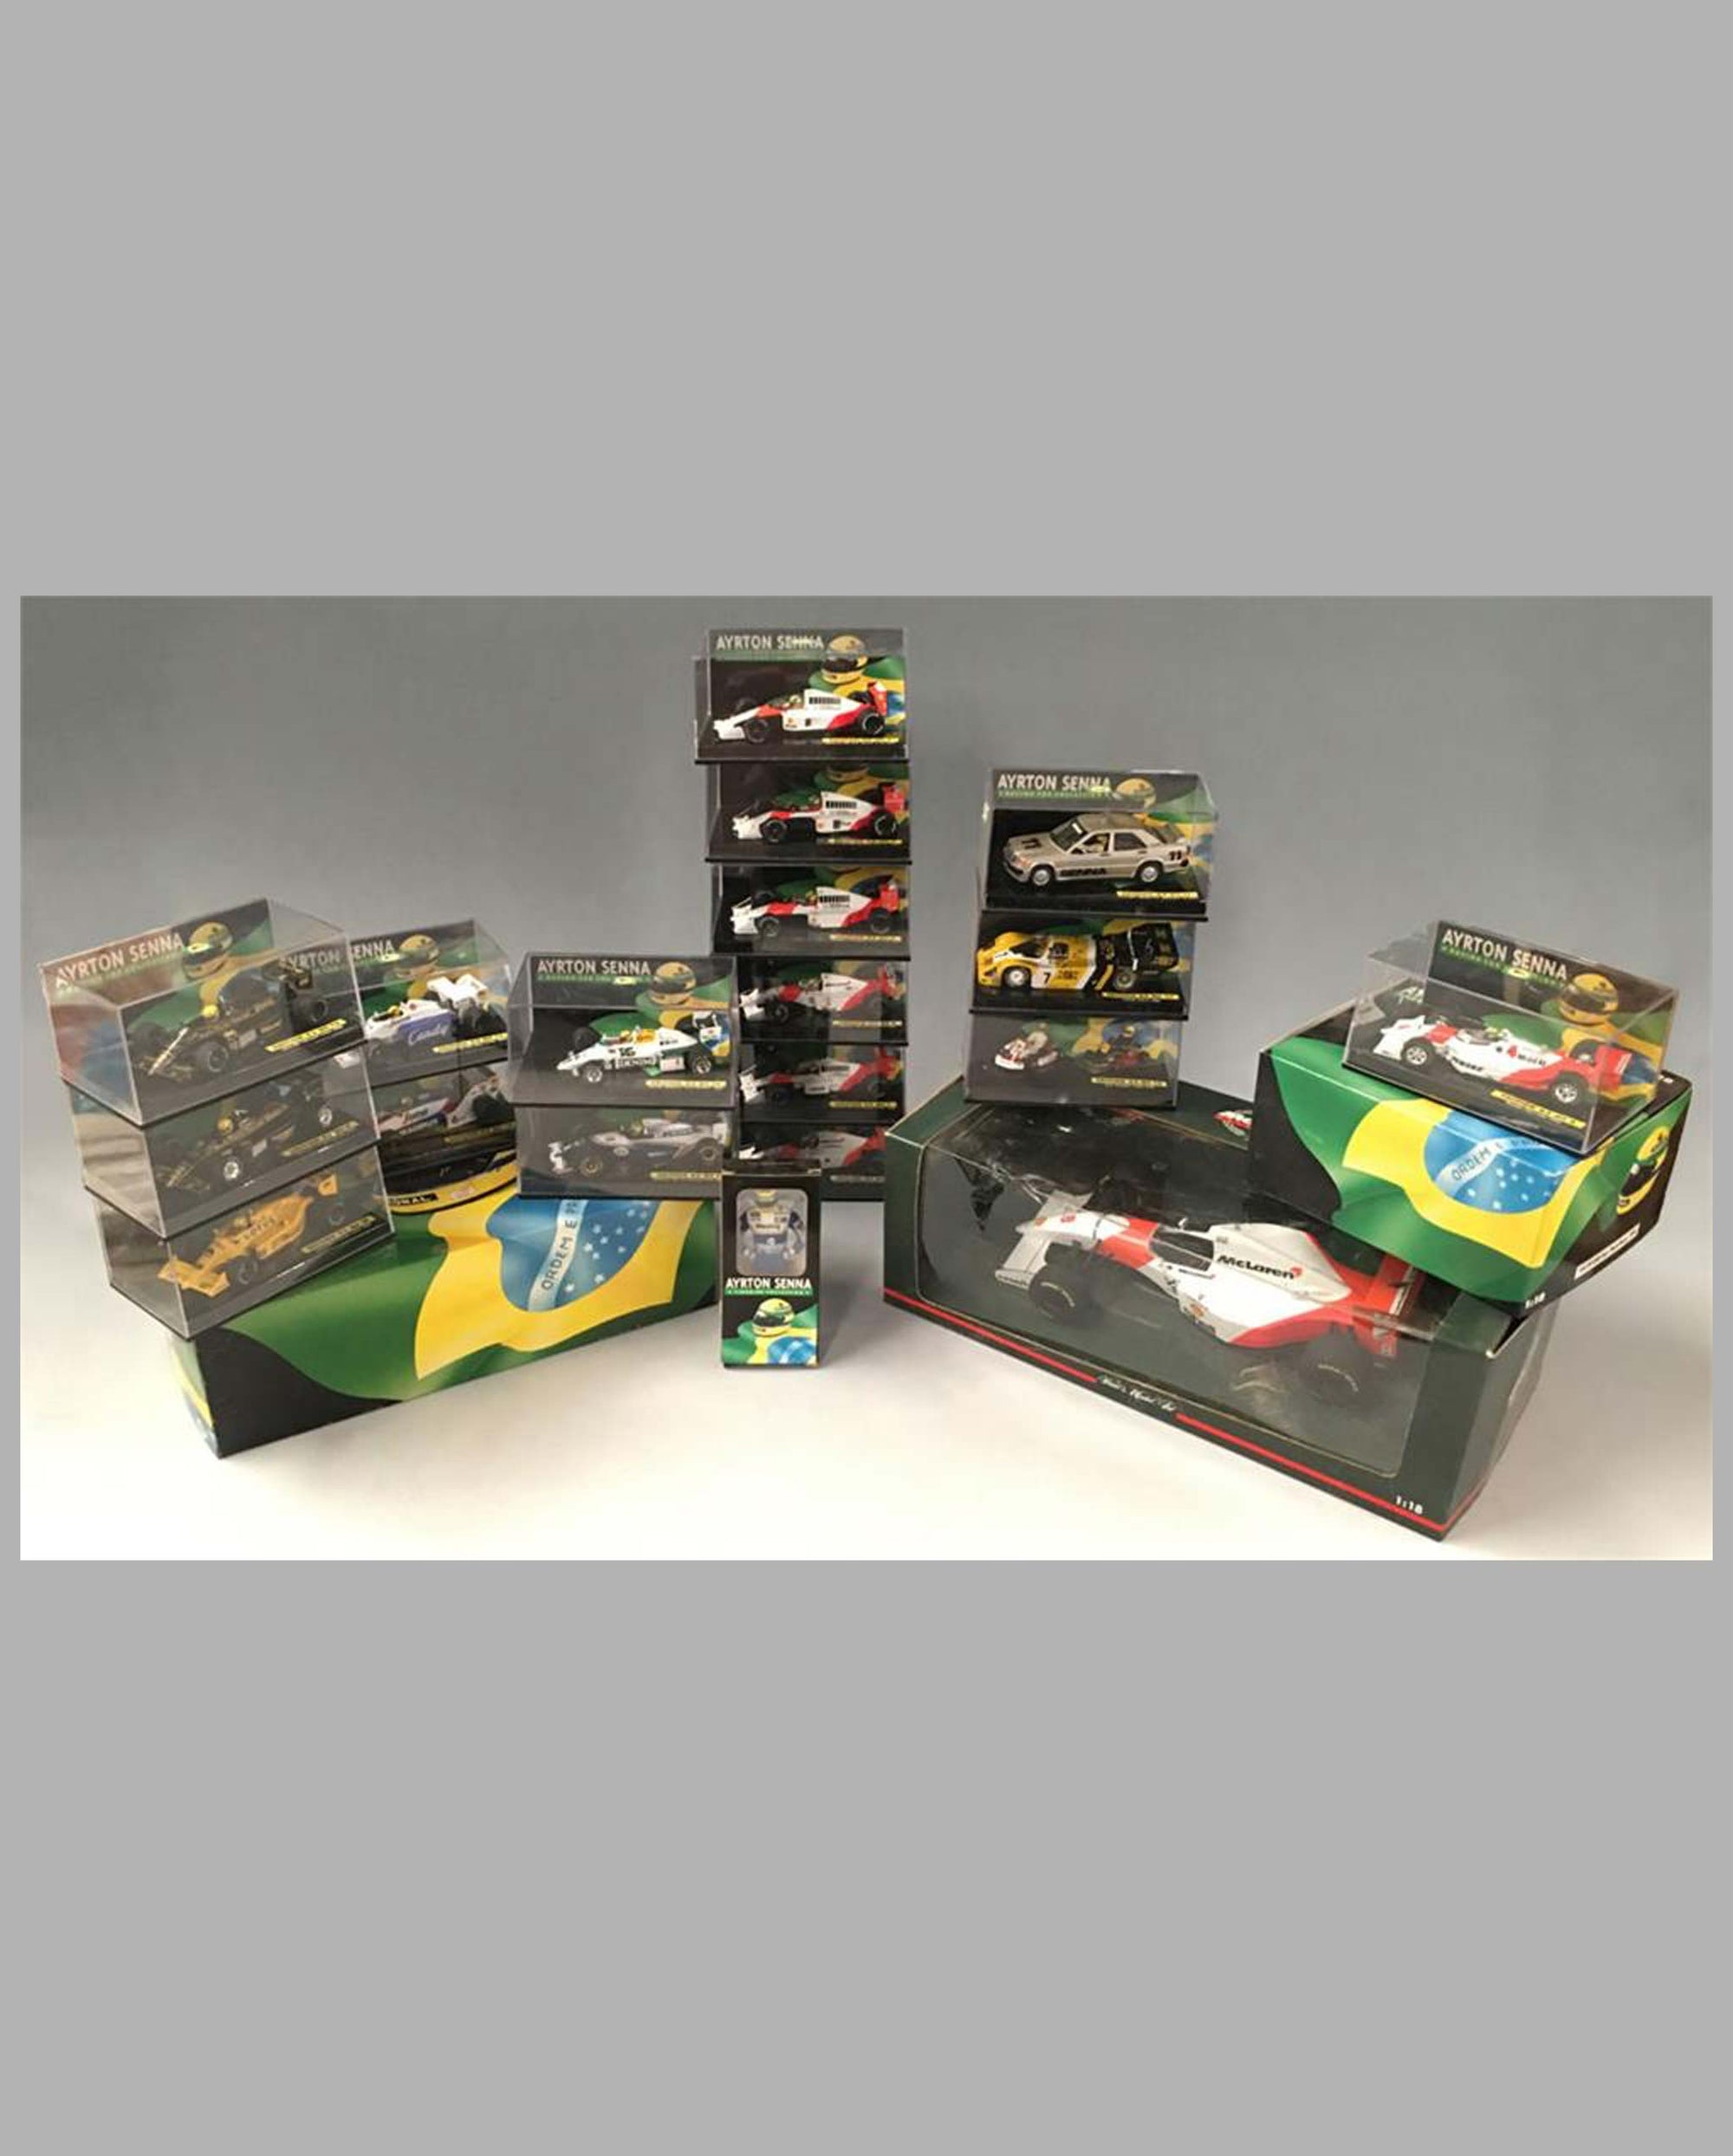 Collection of 20 models of different Ayrton Senna race cars Lot of 20